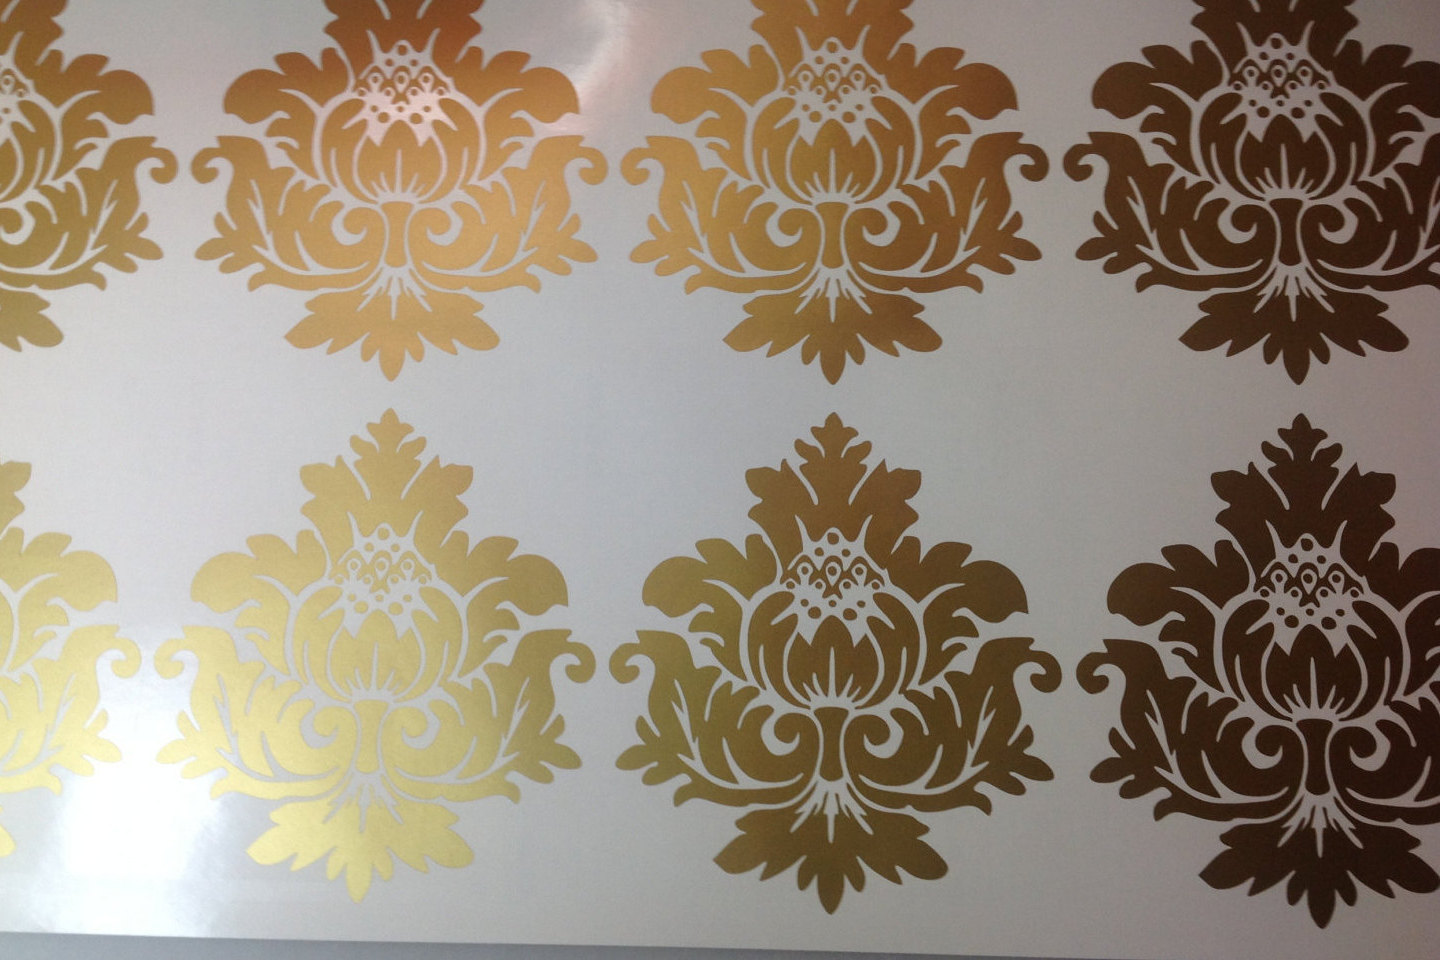 Popular items for gold wall decals on Etsy